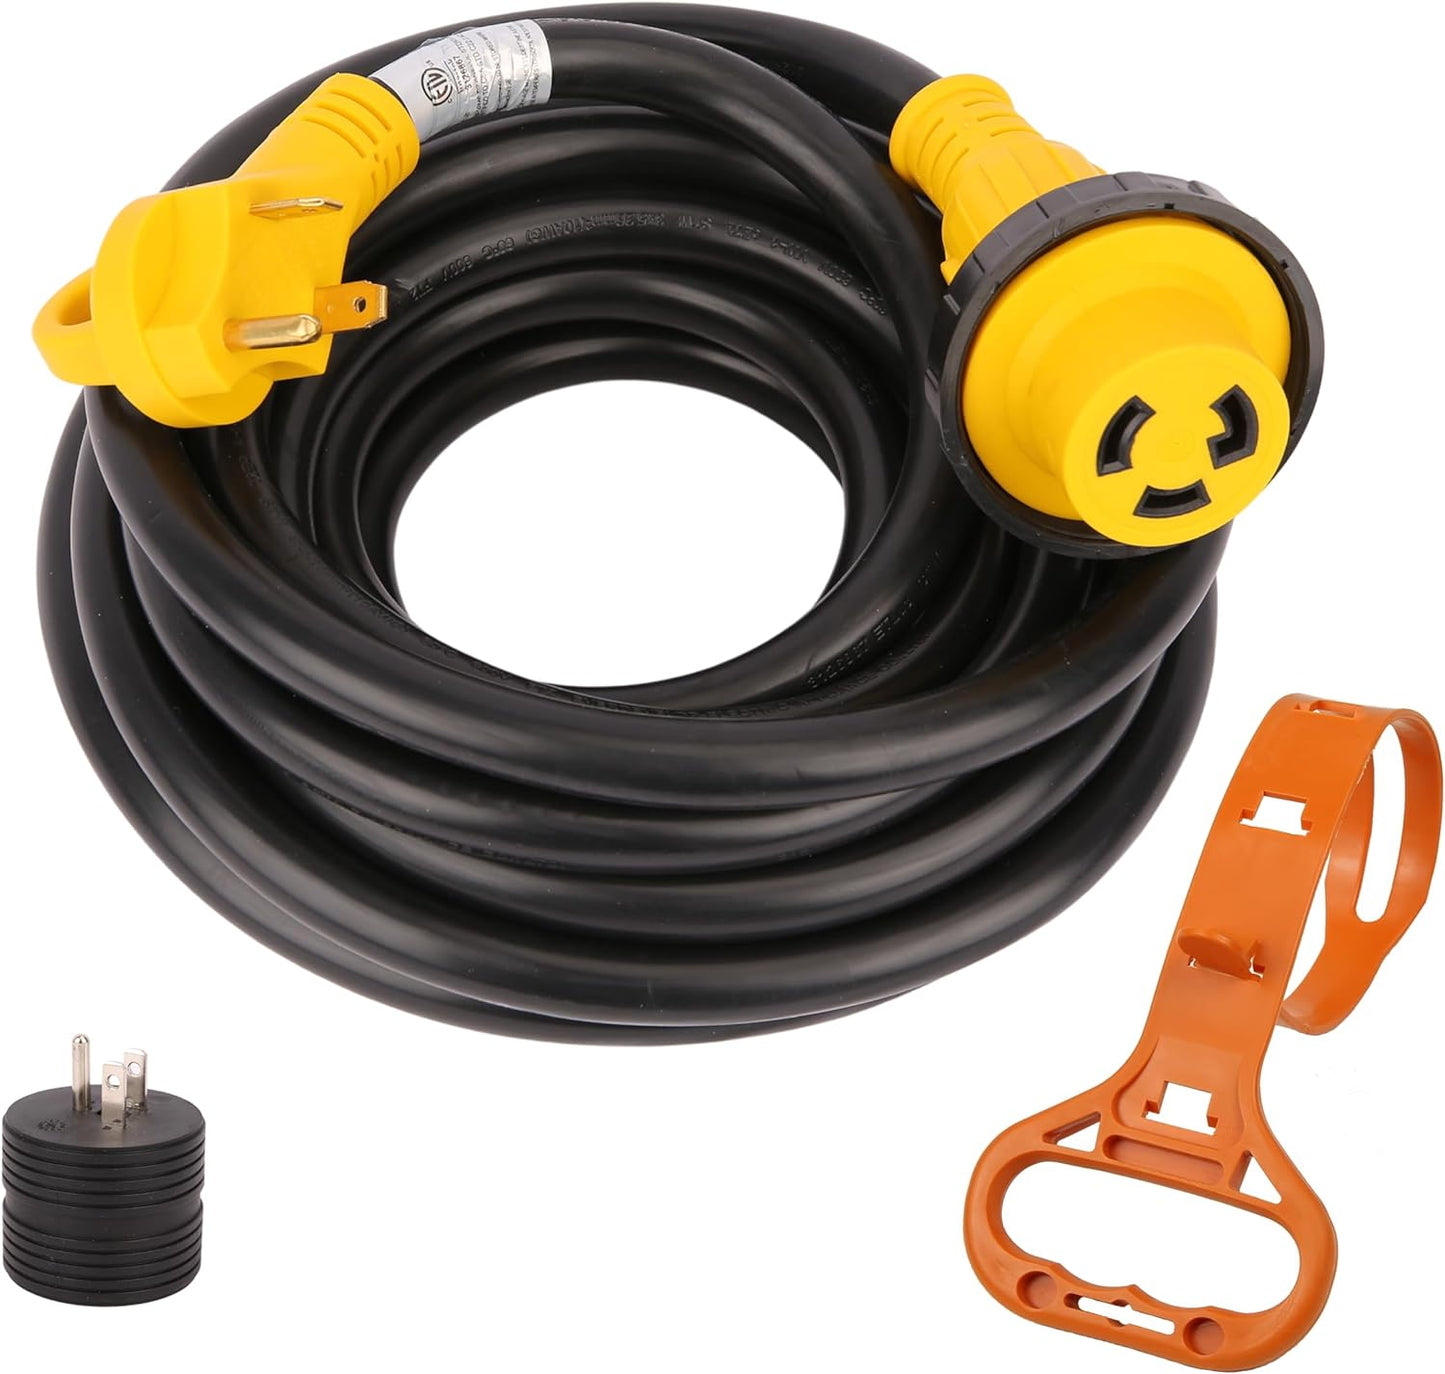 PTR0115 30A 25ft RV Extension Cord L5-30R to TT-30P with 15A to 30A Adapter and Cord Organizer - Case of 4